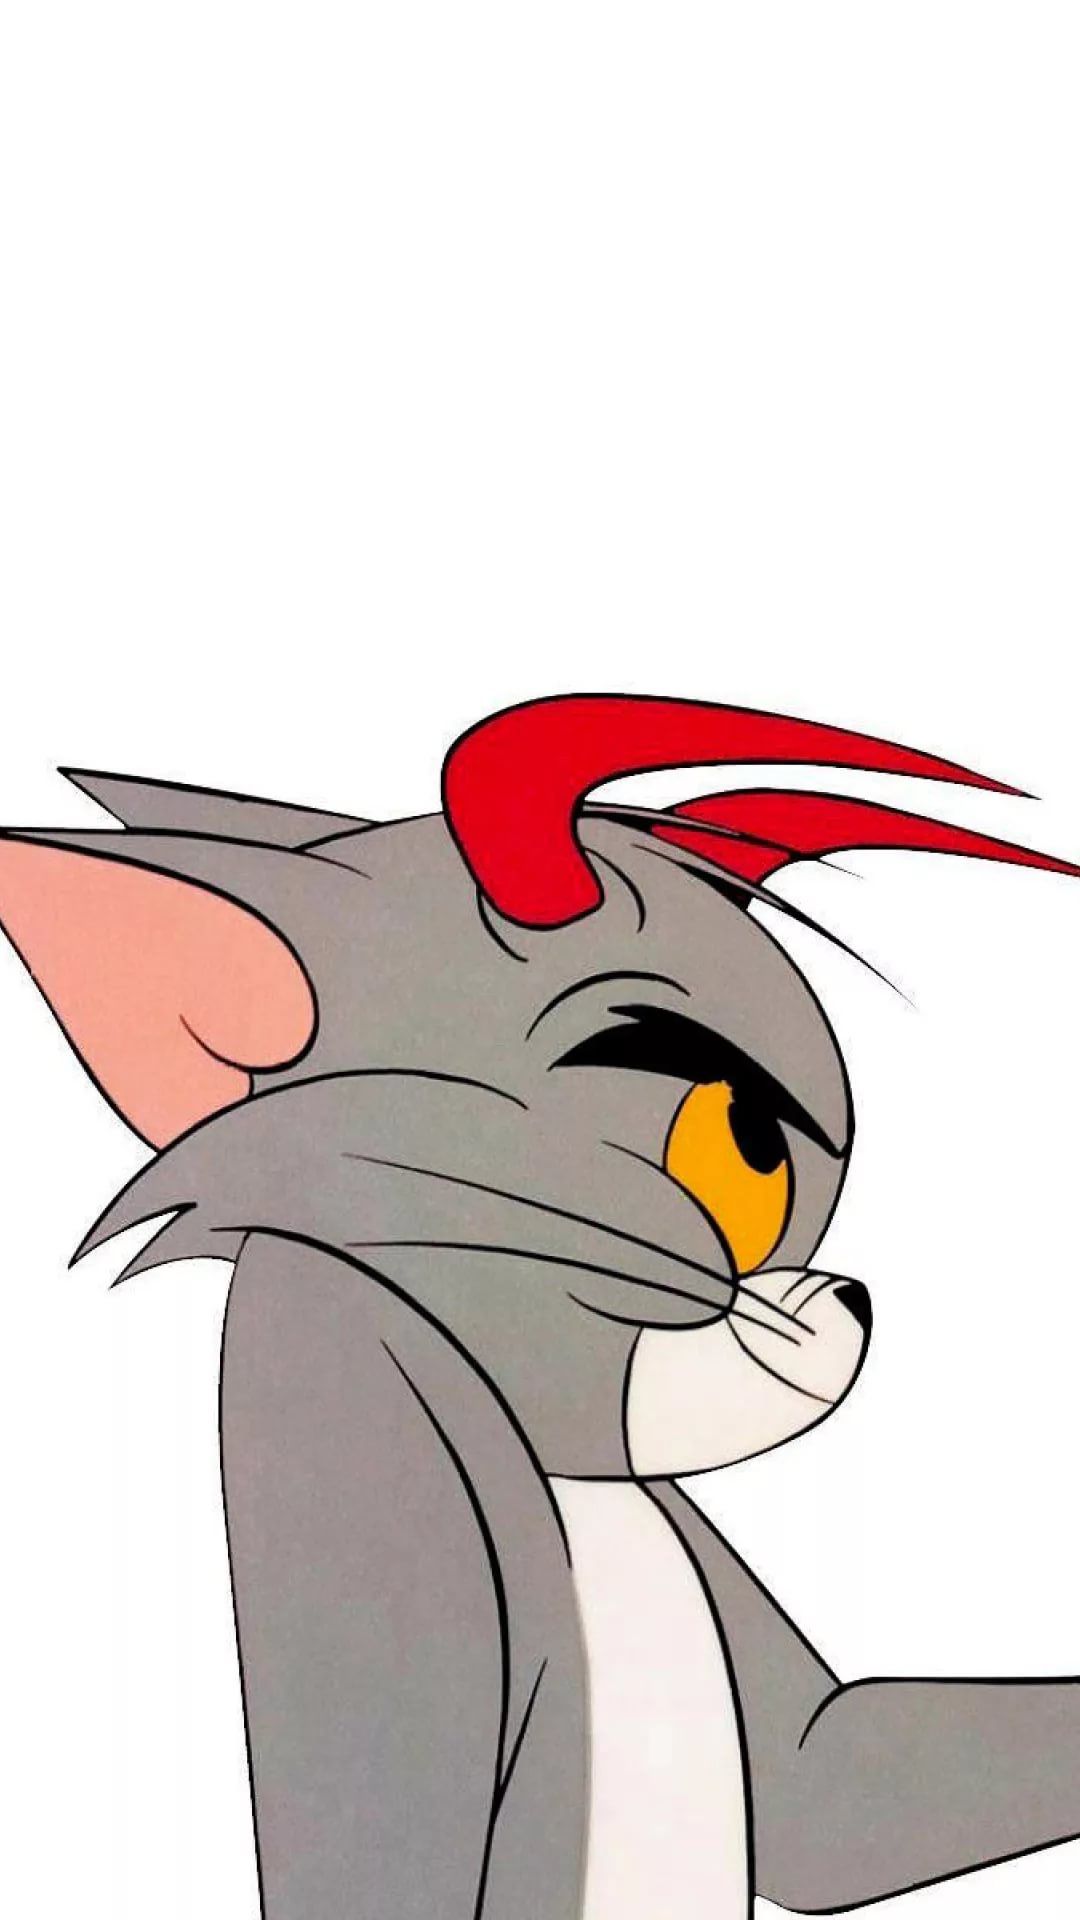 Tom And Jerry hd wallpaper for iPhone 7